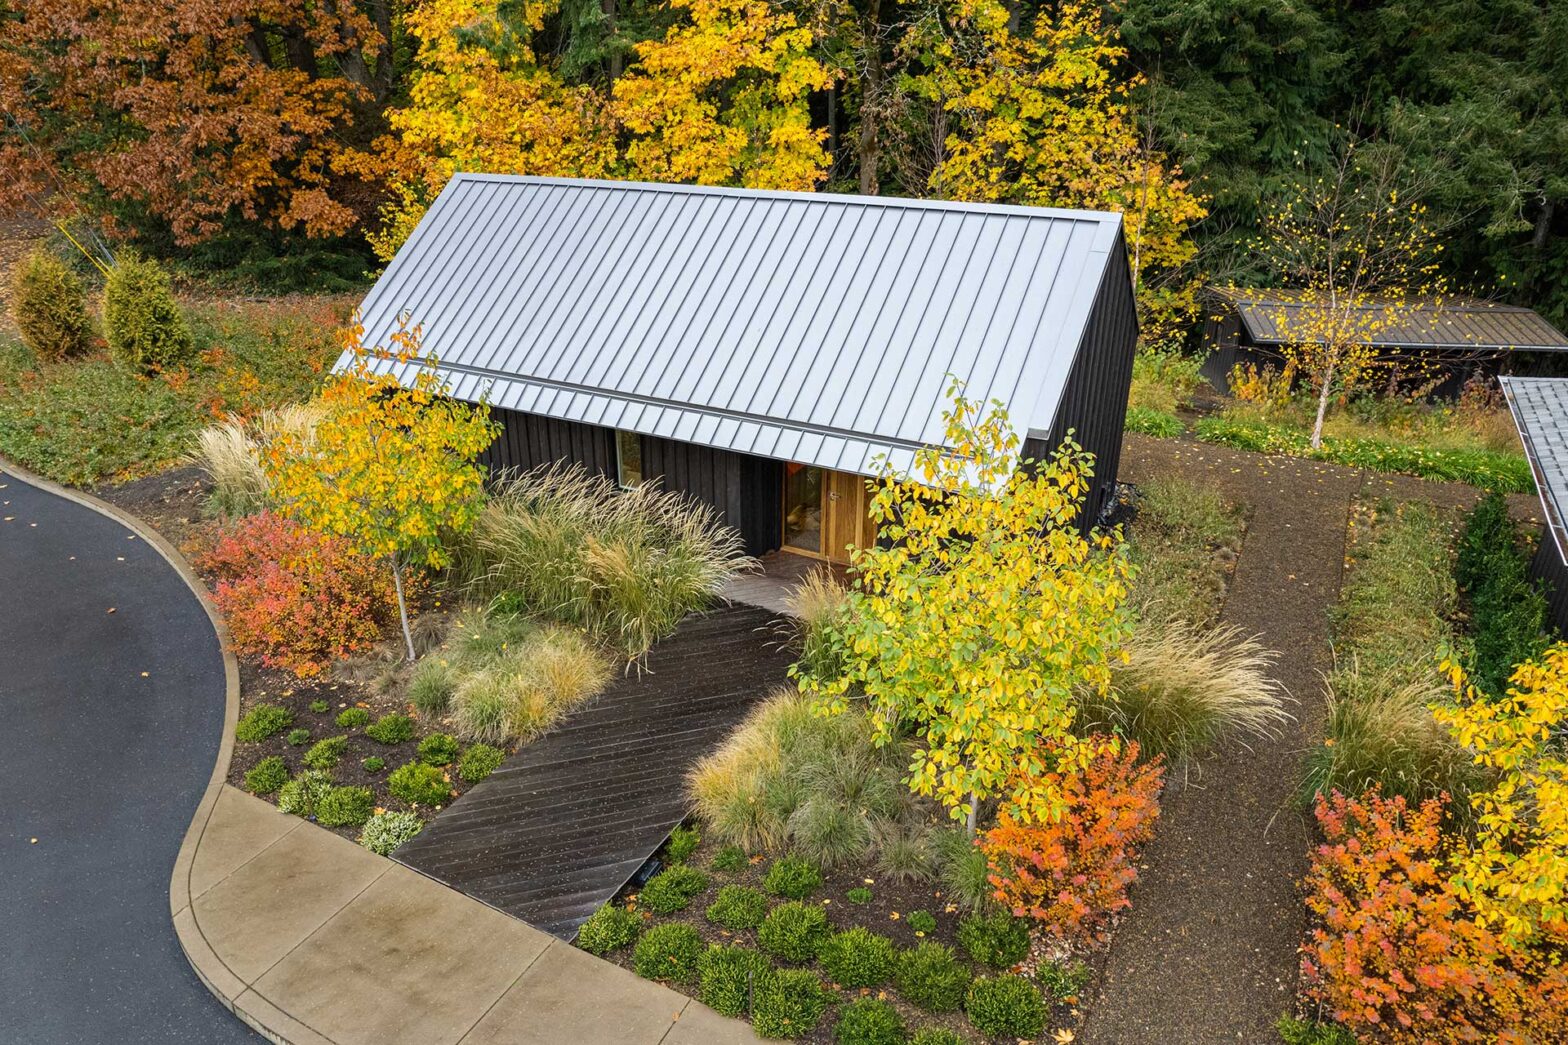 The Christie Architecture Studio is accessed via an ipe wood boardwalk.